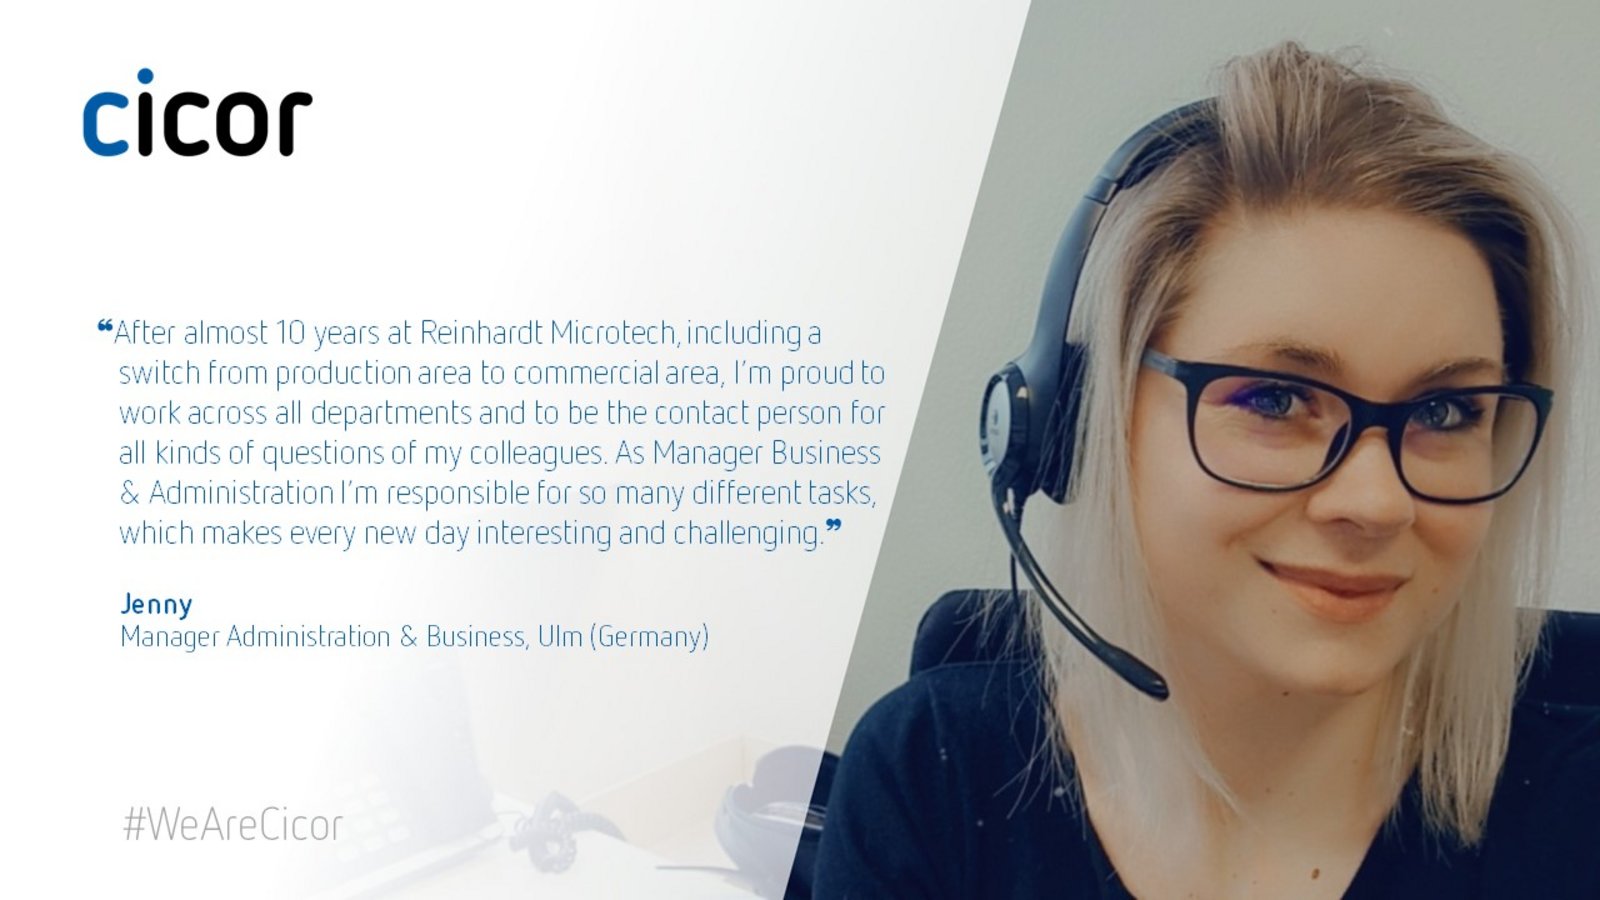 Testimonial of Jenny who works at the Cicor site in Ulm